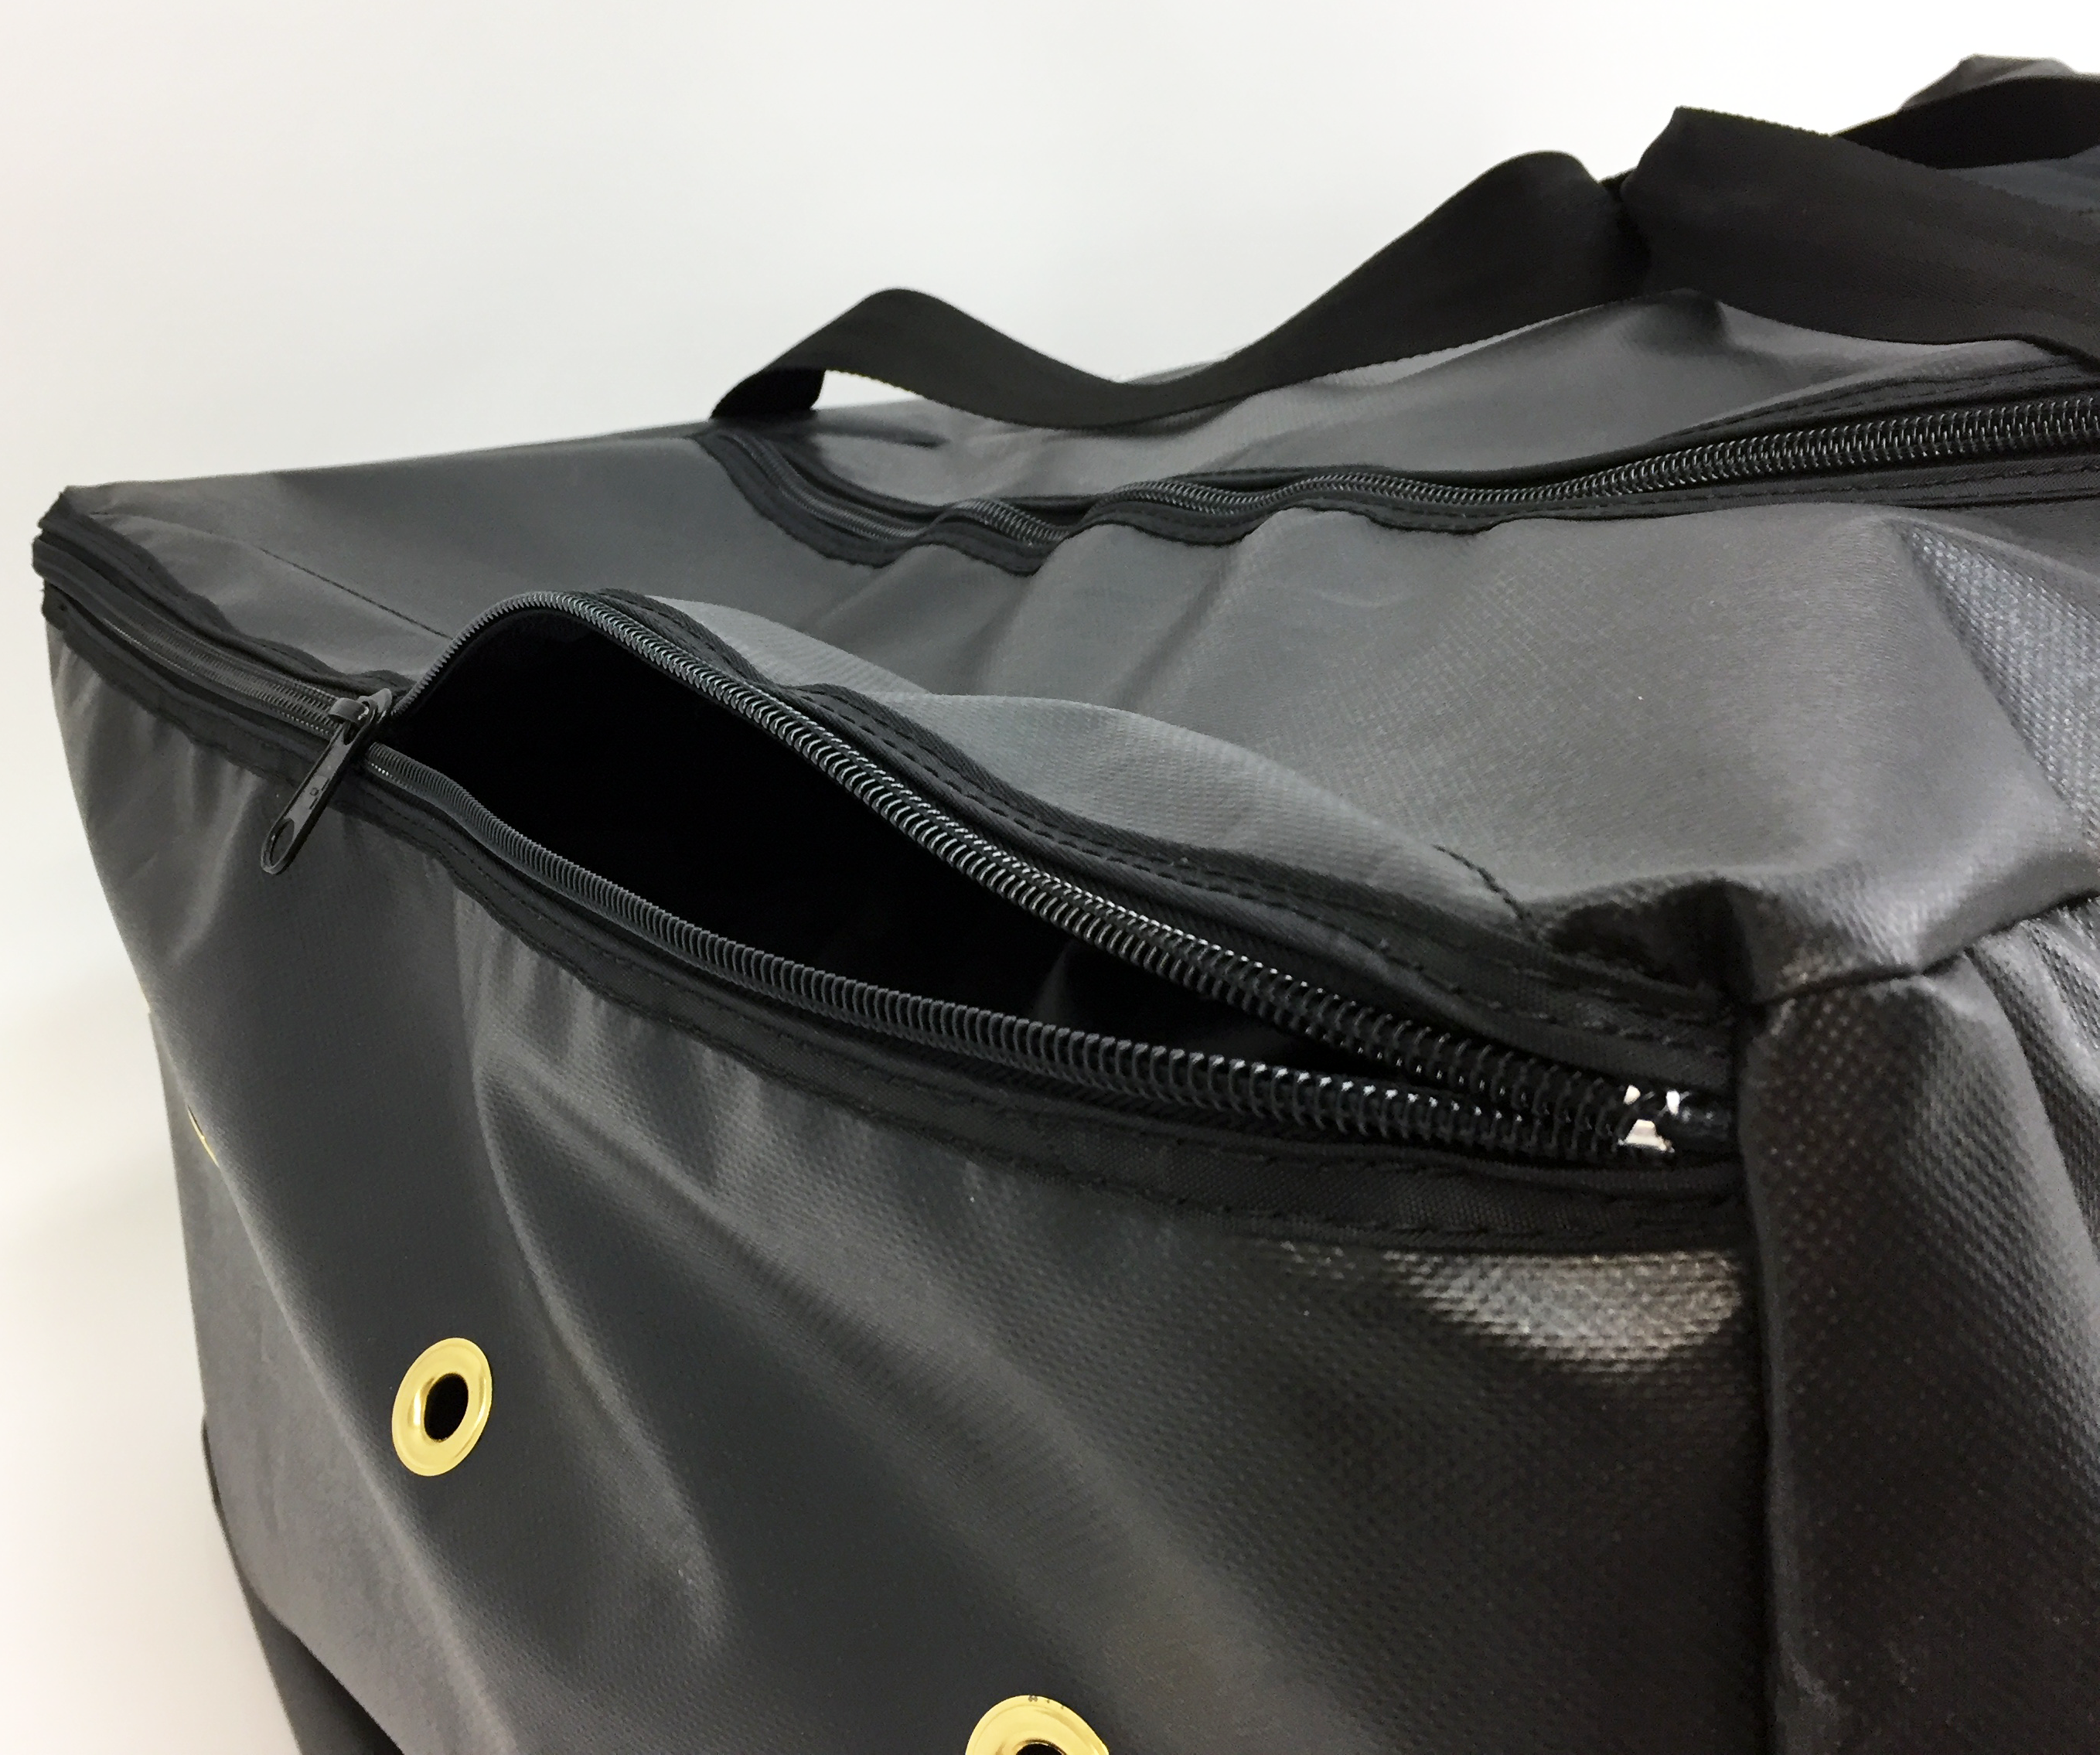 End compartment of bag with zipper opened